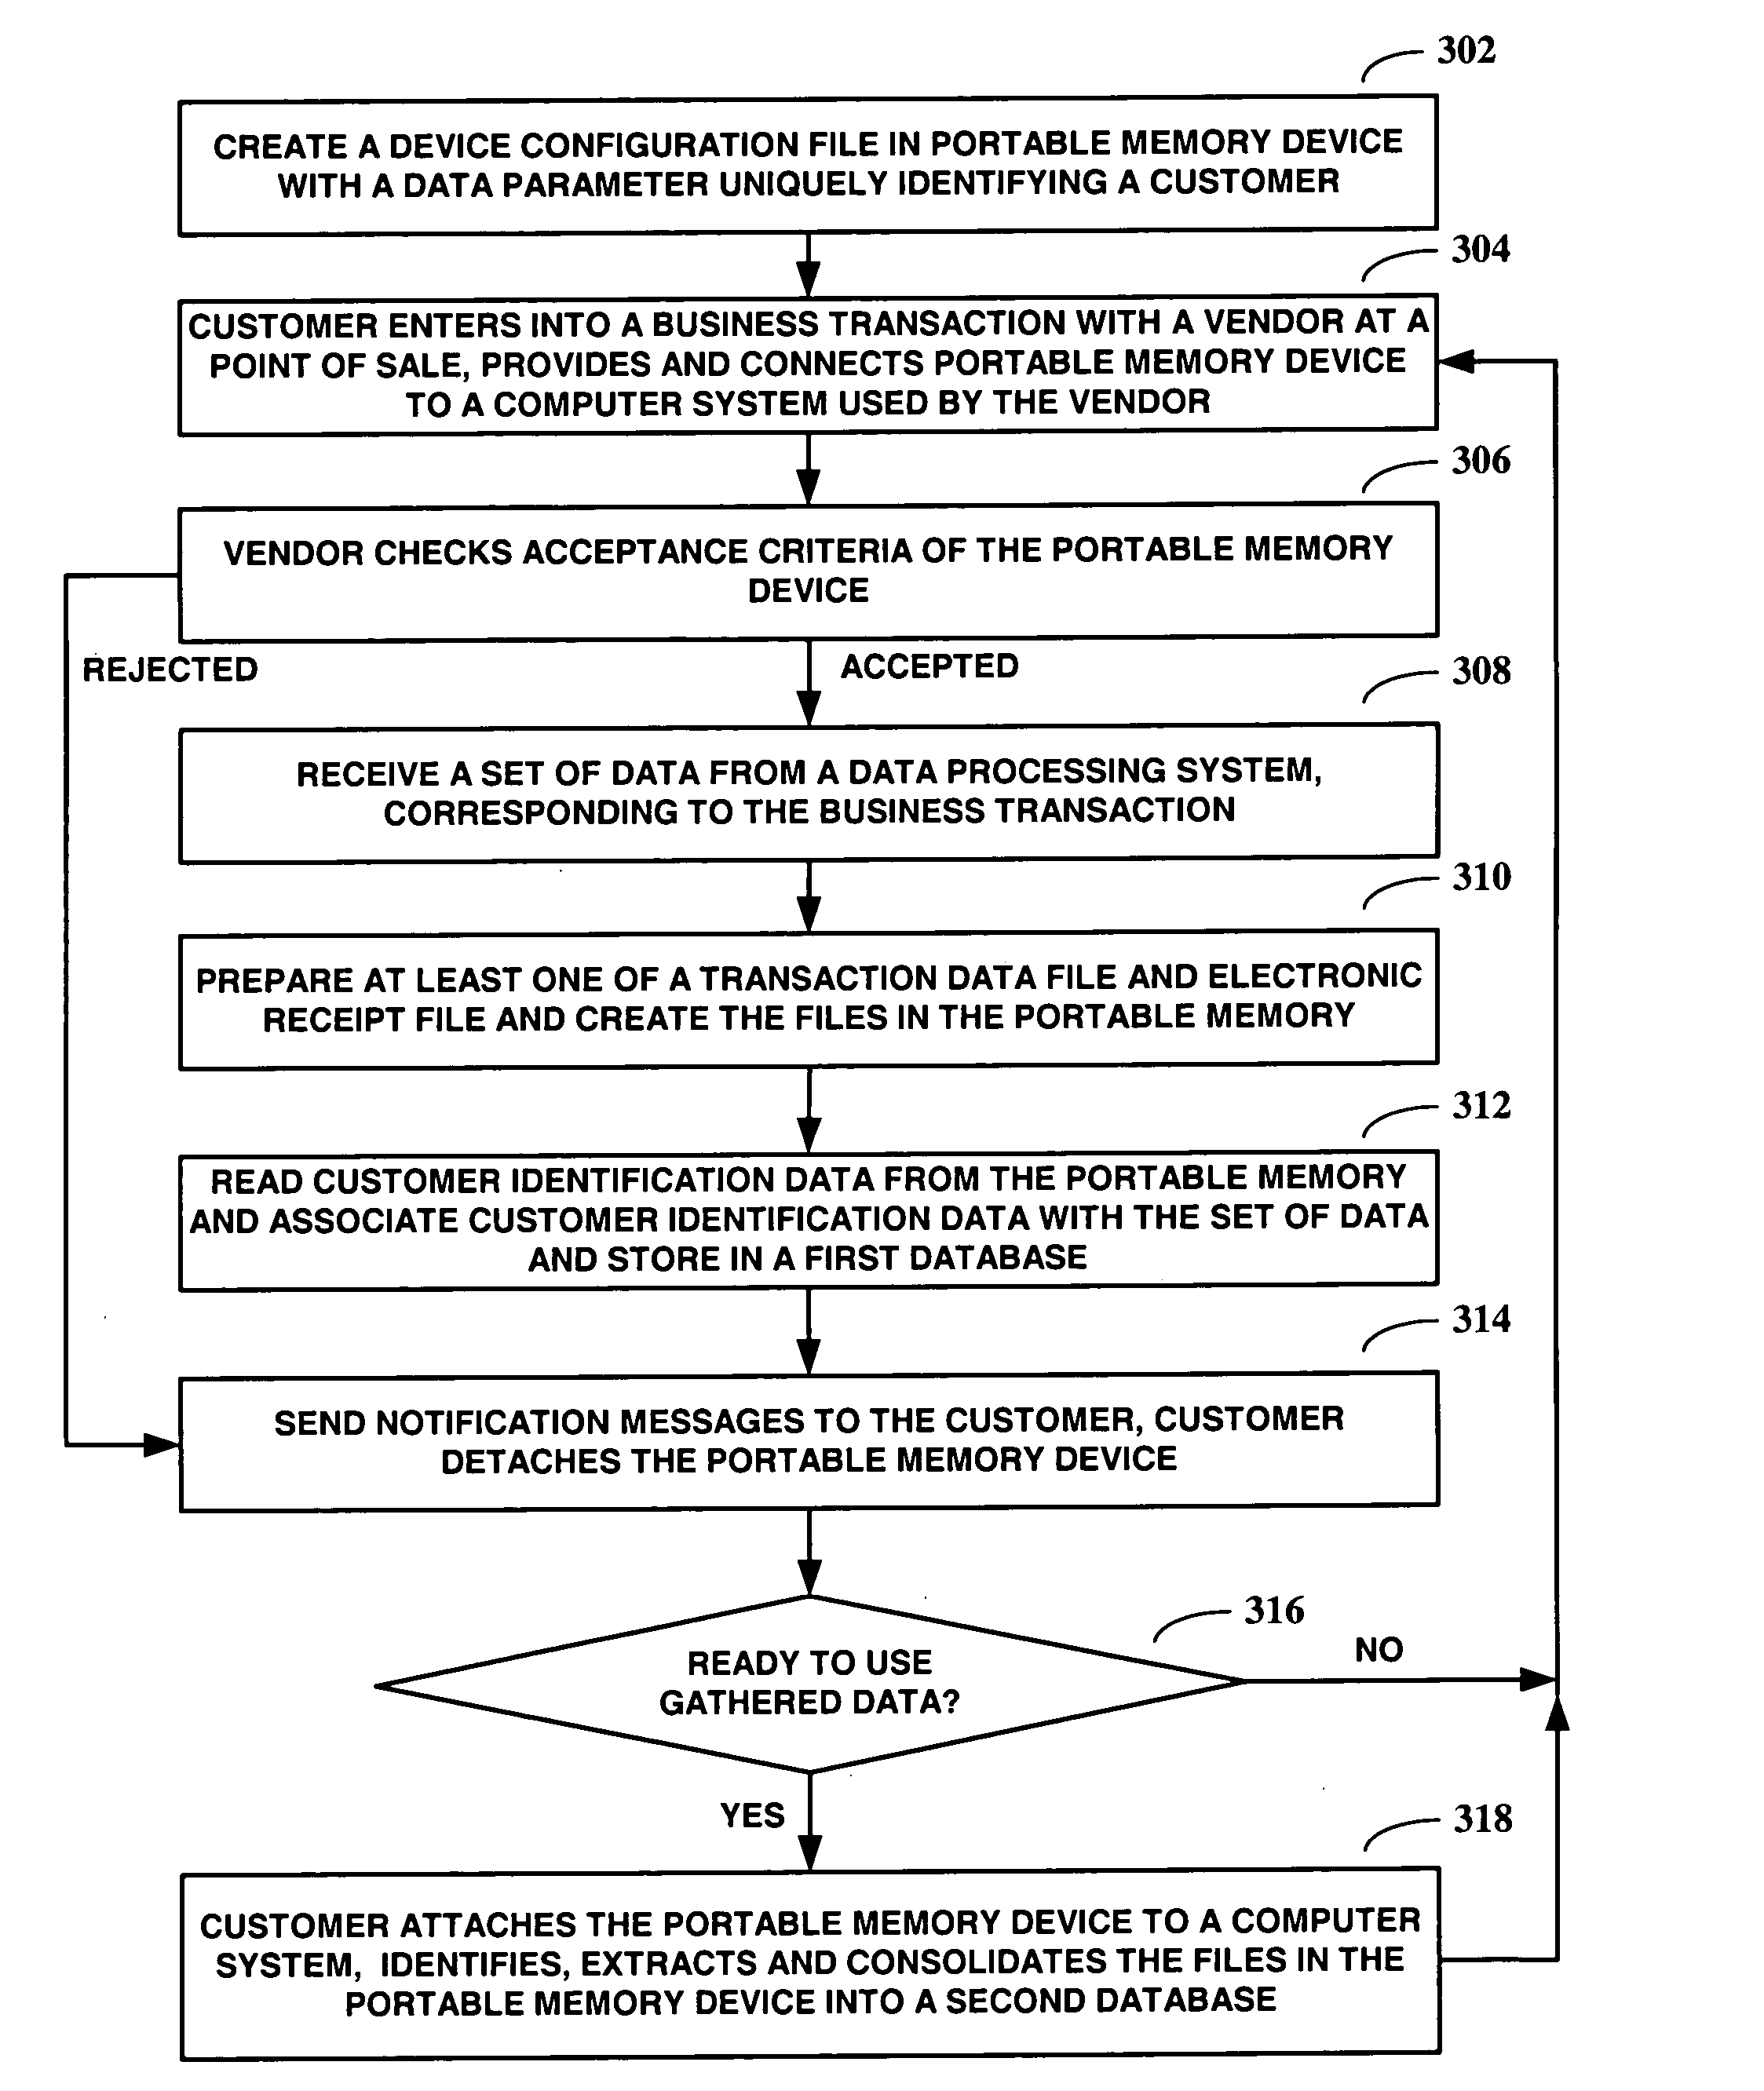 Point of sale business transaction data gathering using portable memory device